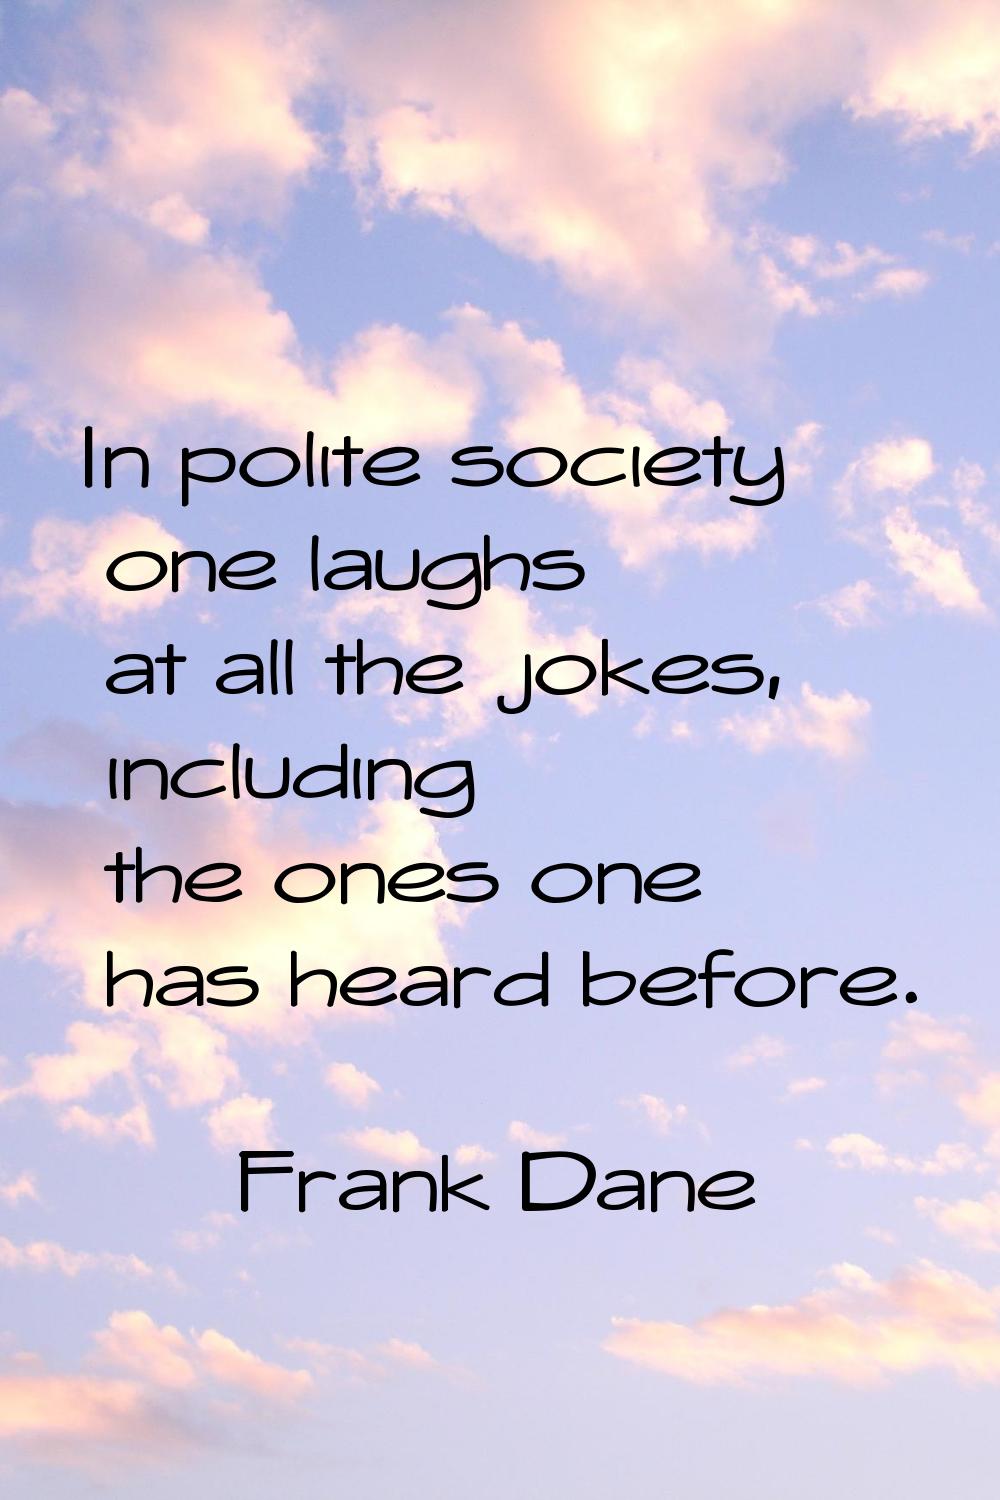 In polite society one laughs at all the jokes, including the ones one has heard before.